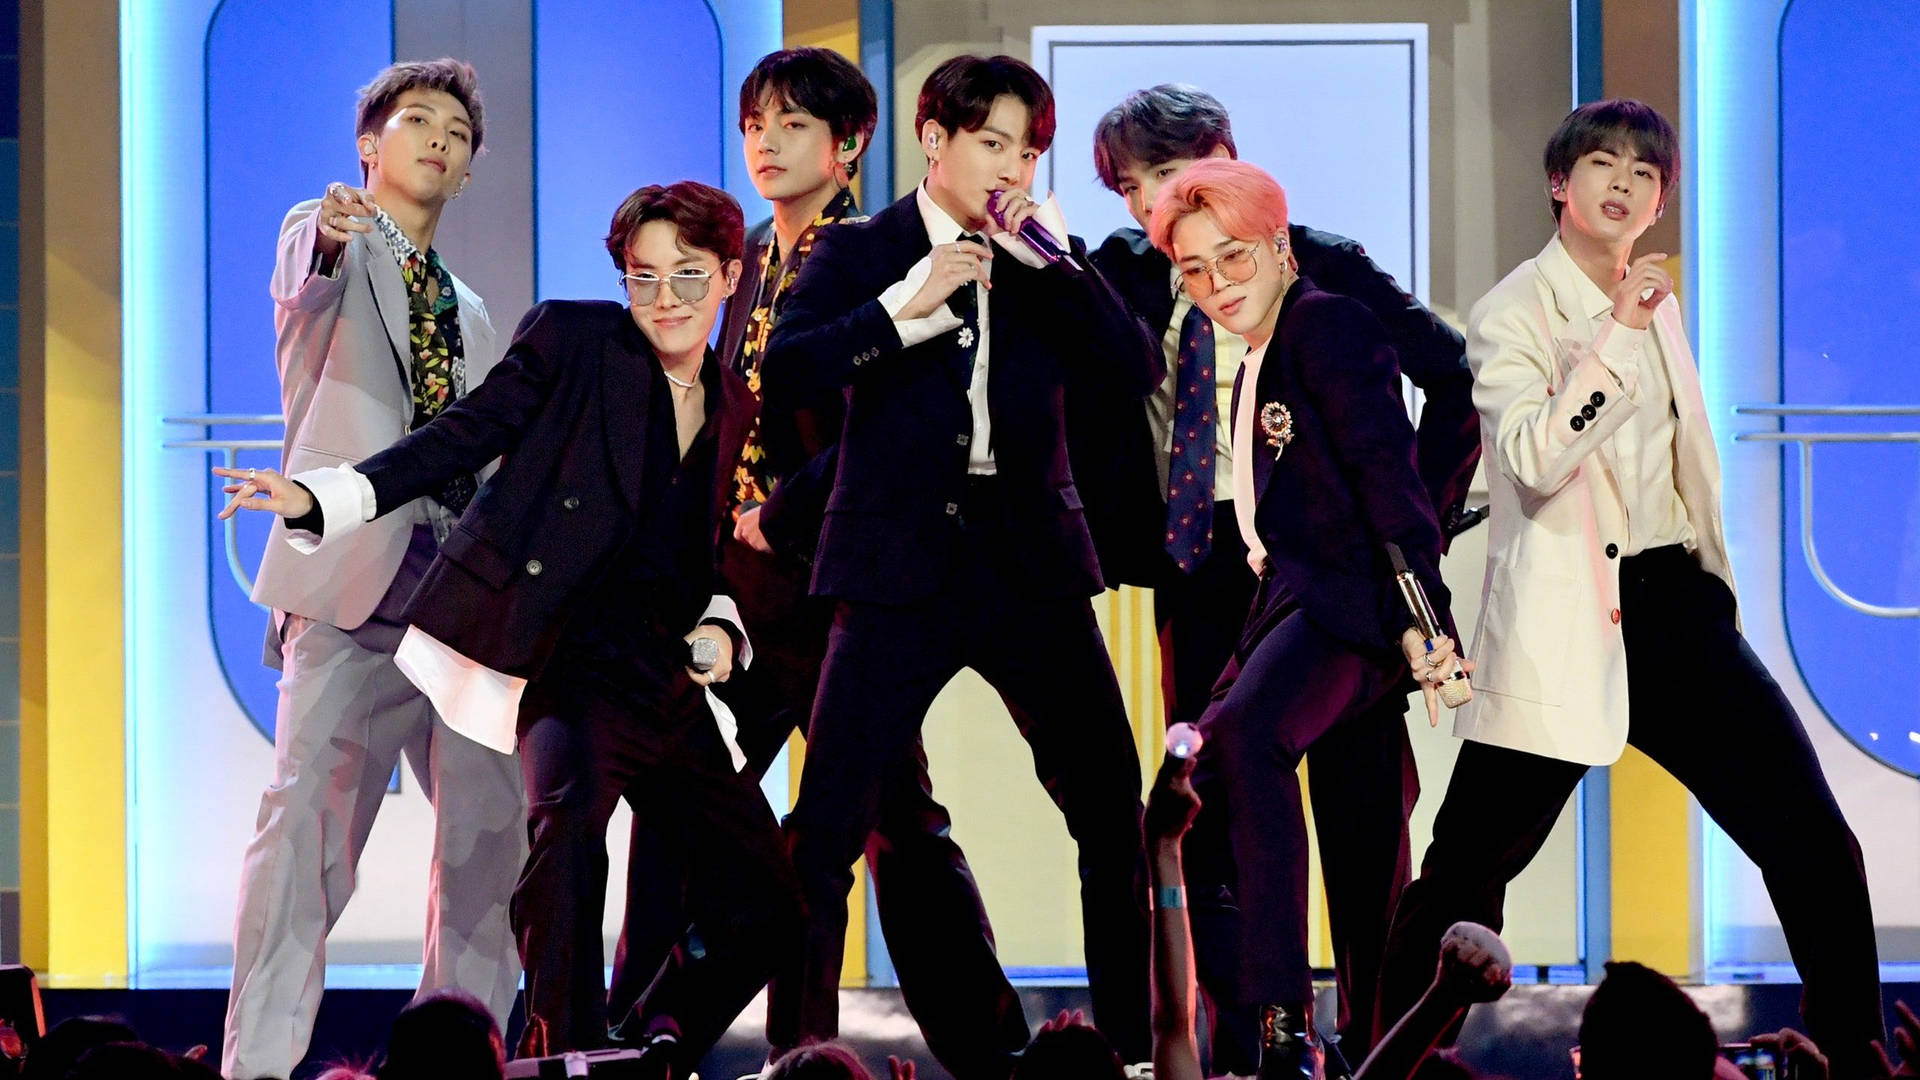 Bts 2021 Performing On Stage Wallpaper